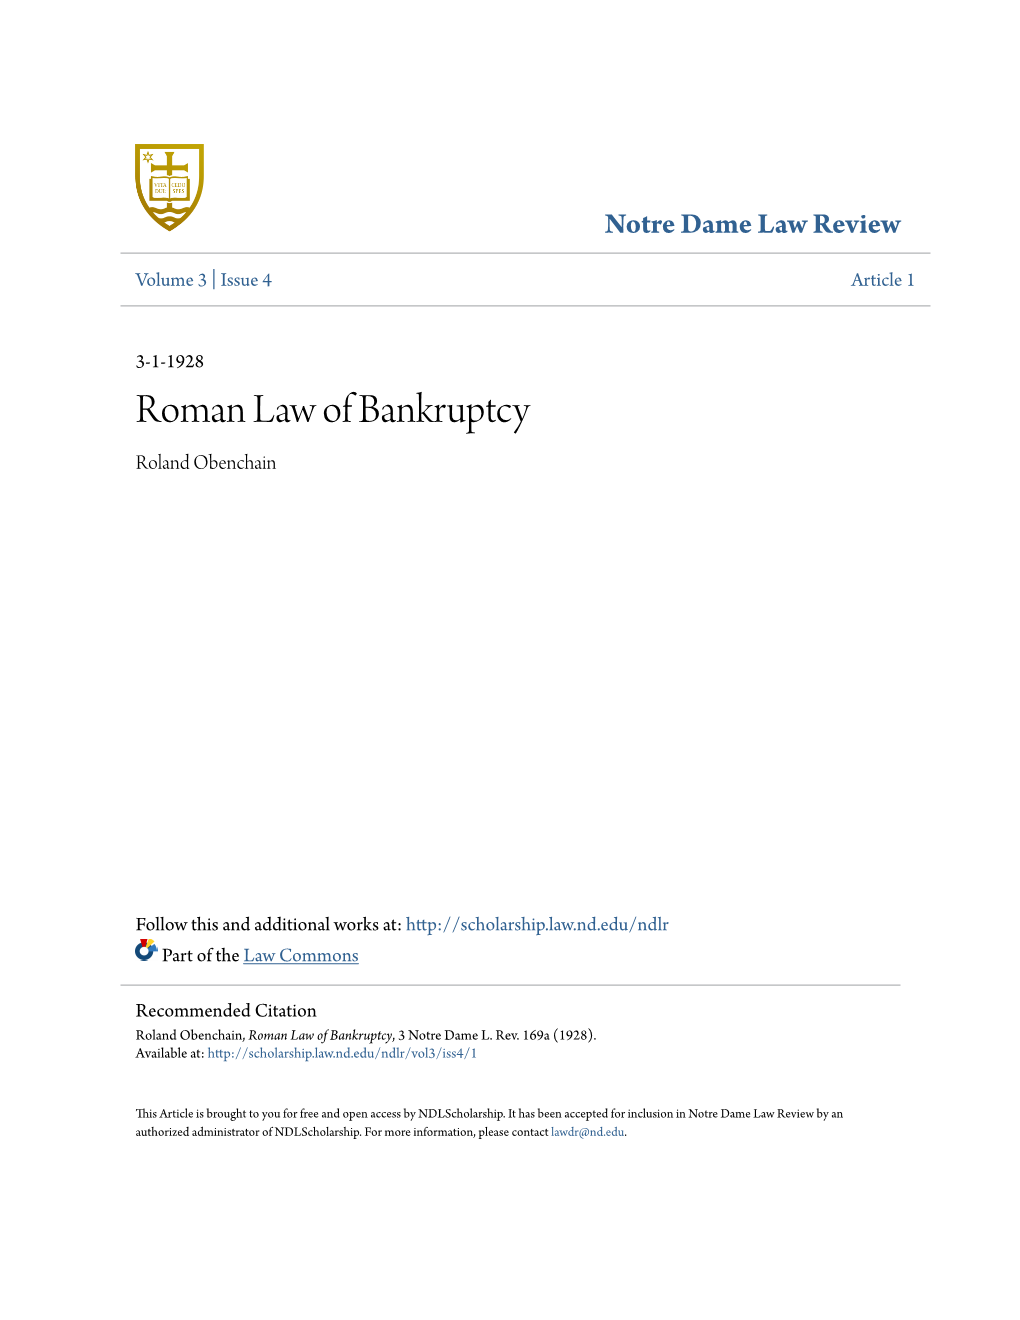 Roman Law of Bankruptcy Roland Obenchain